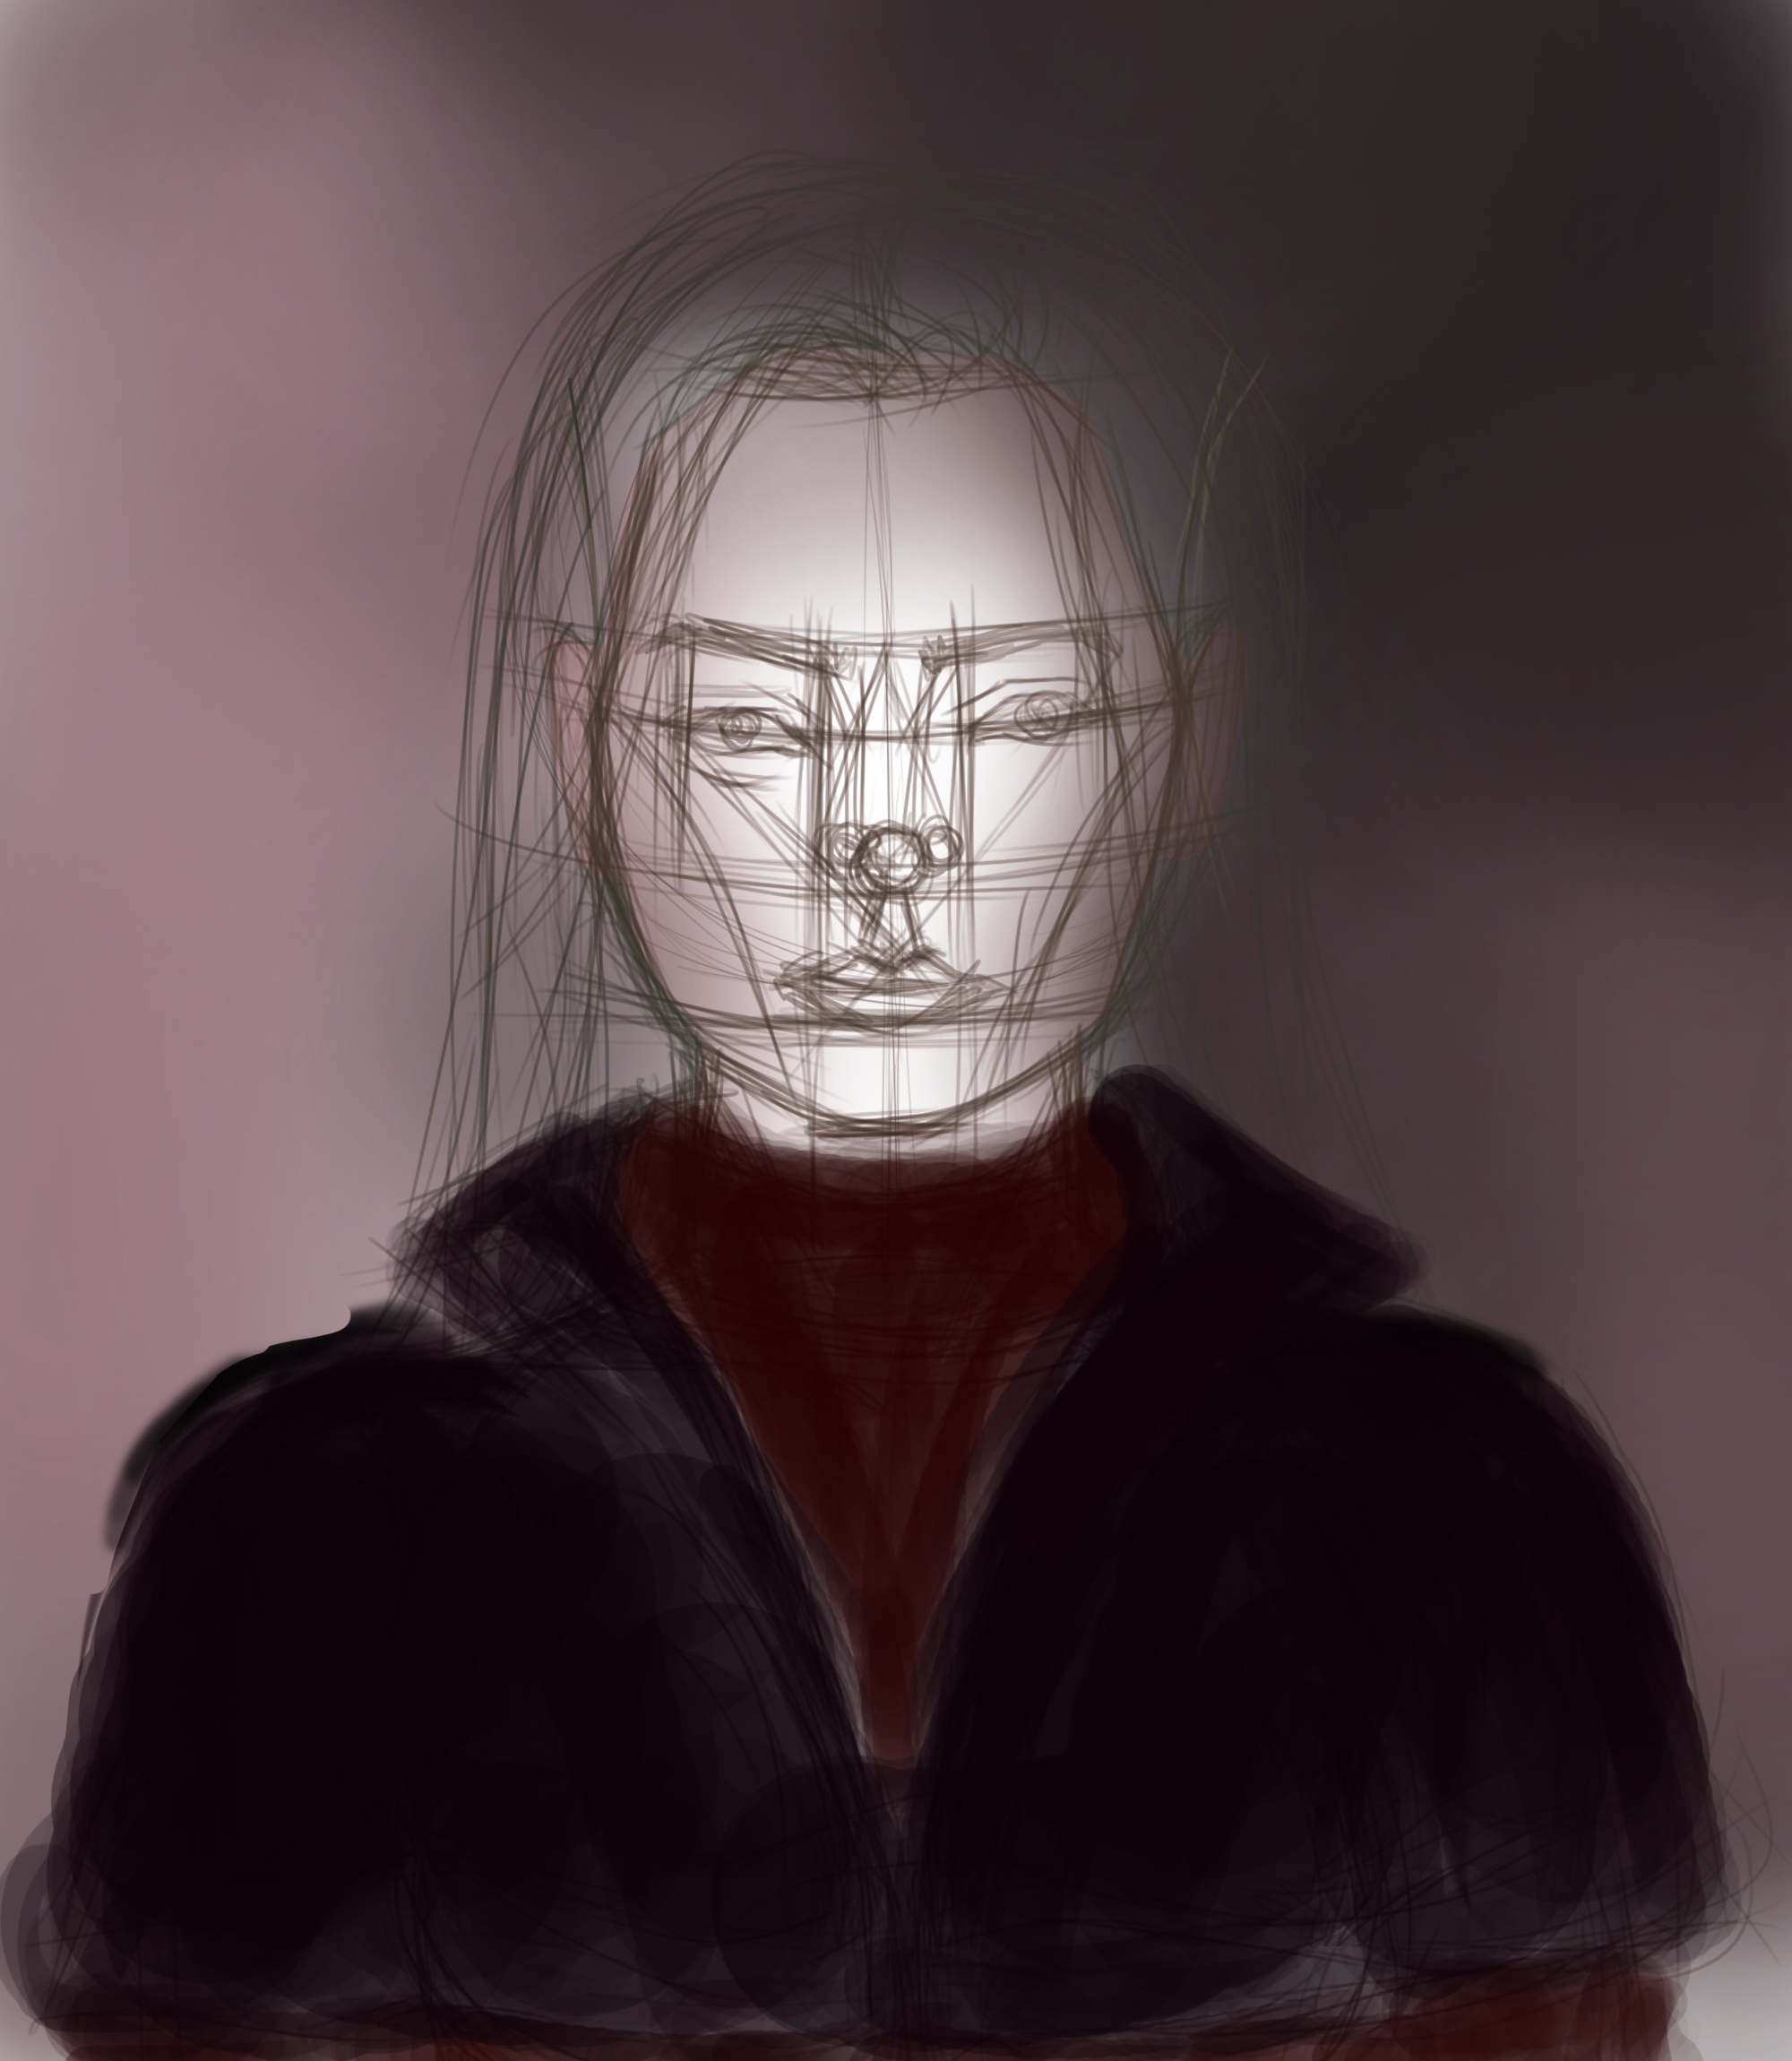 Francisftlp-Digital Drawing She Mysterious- Step 2.png